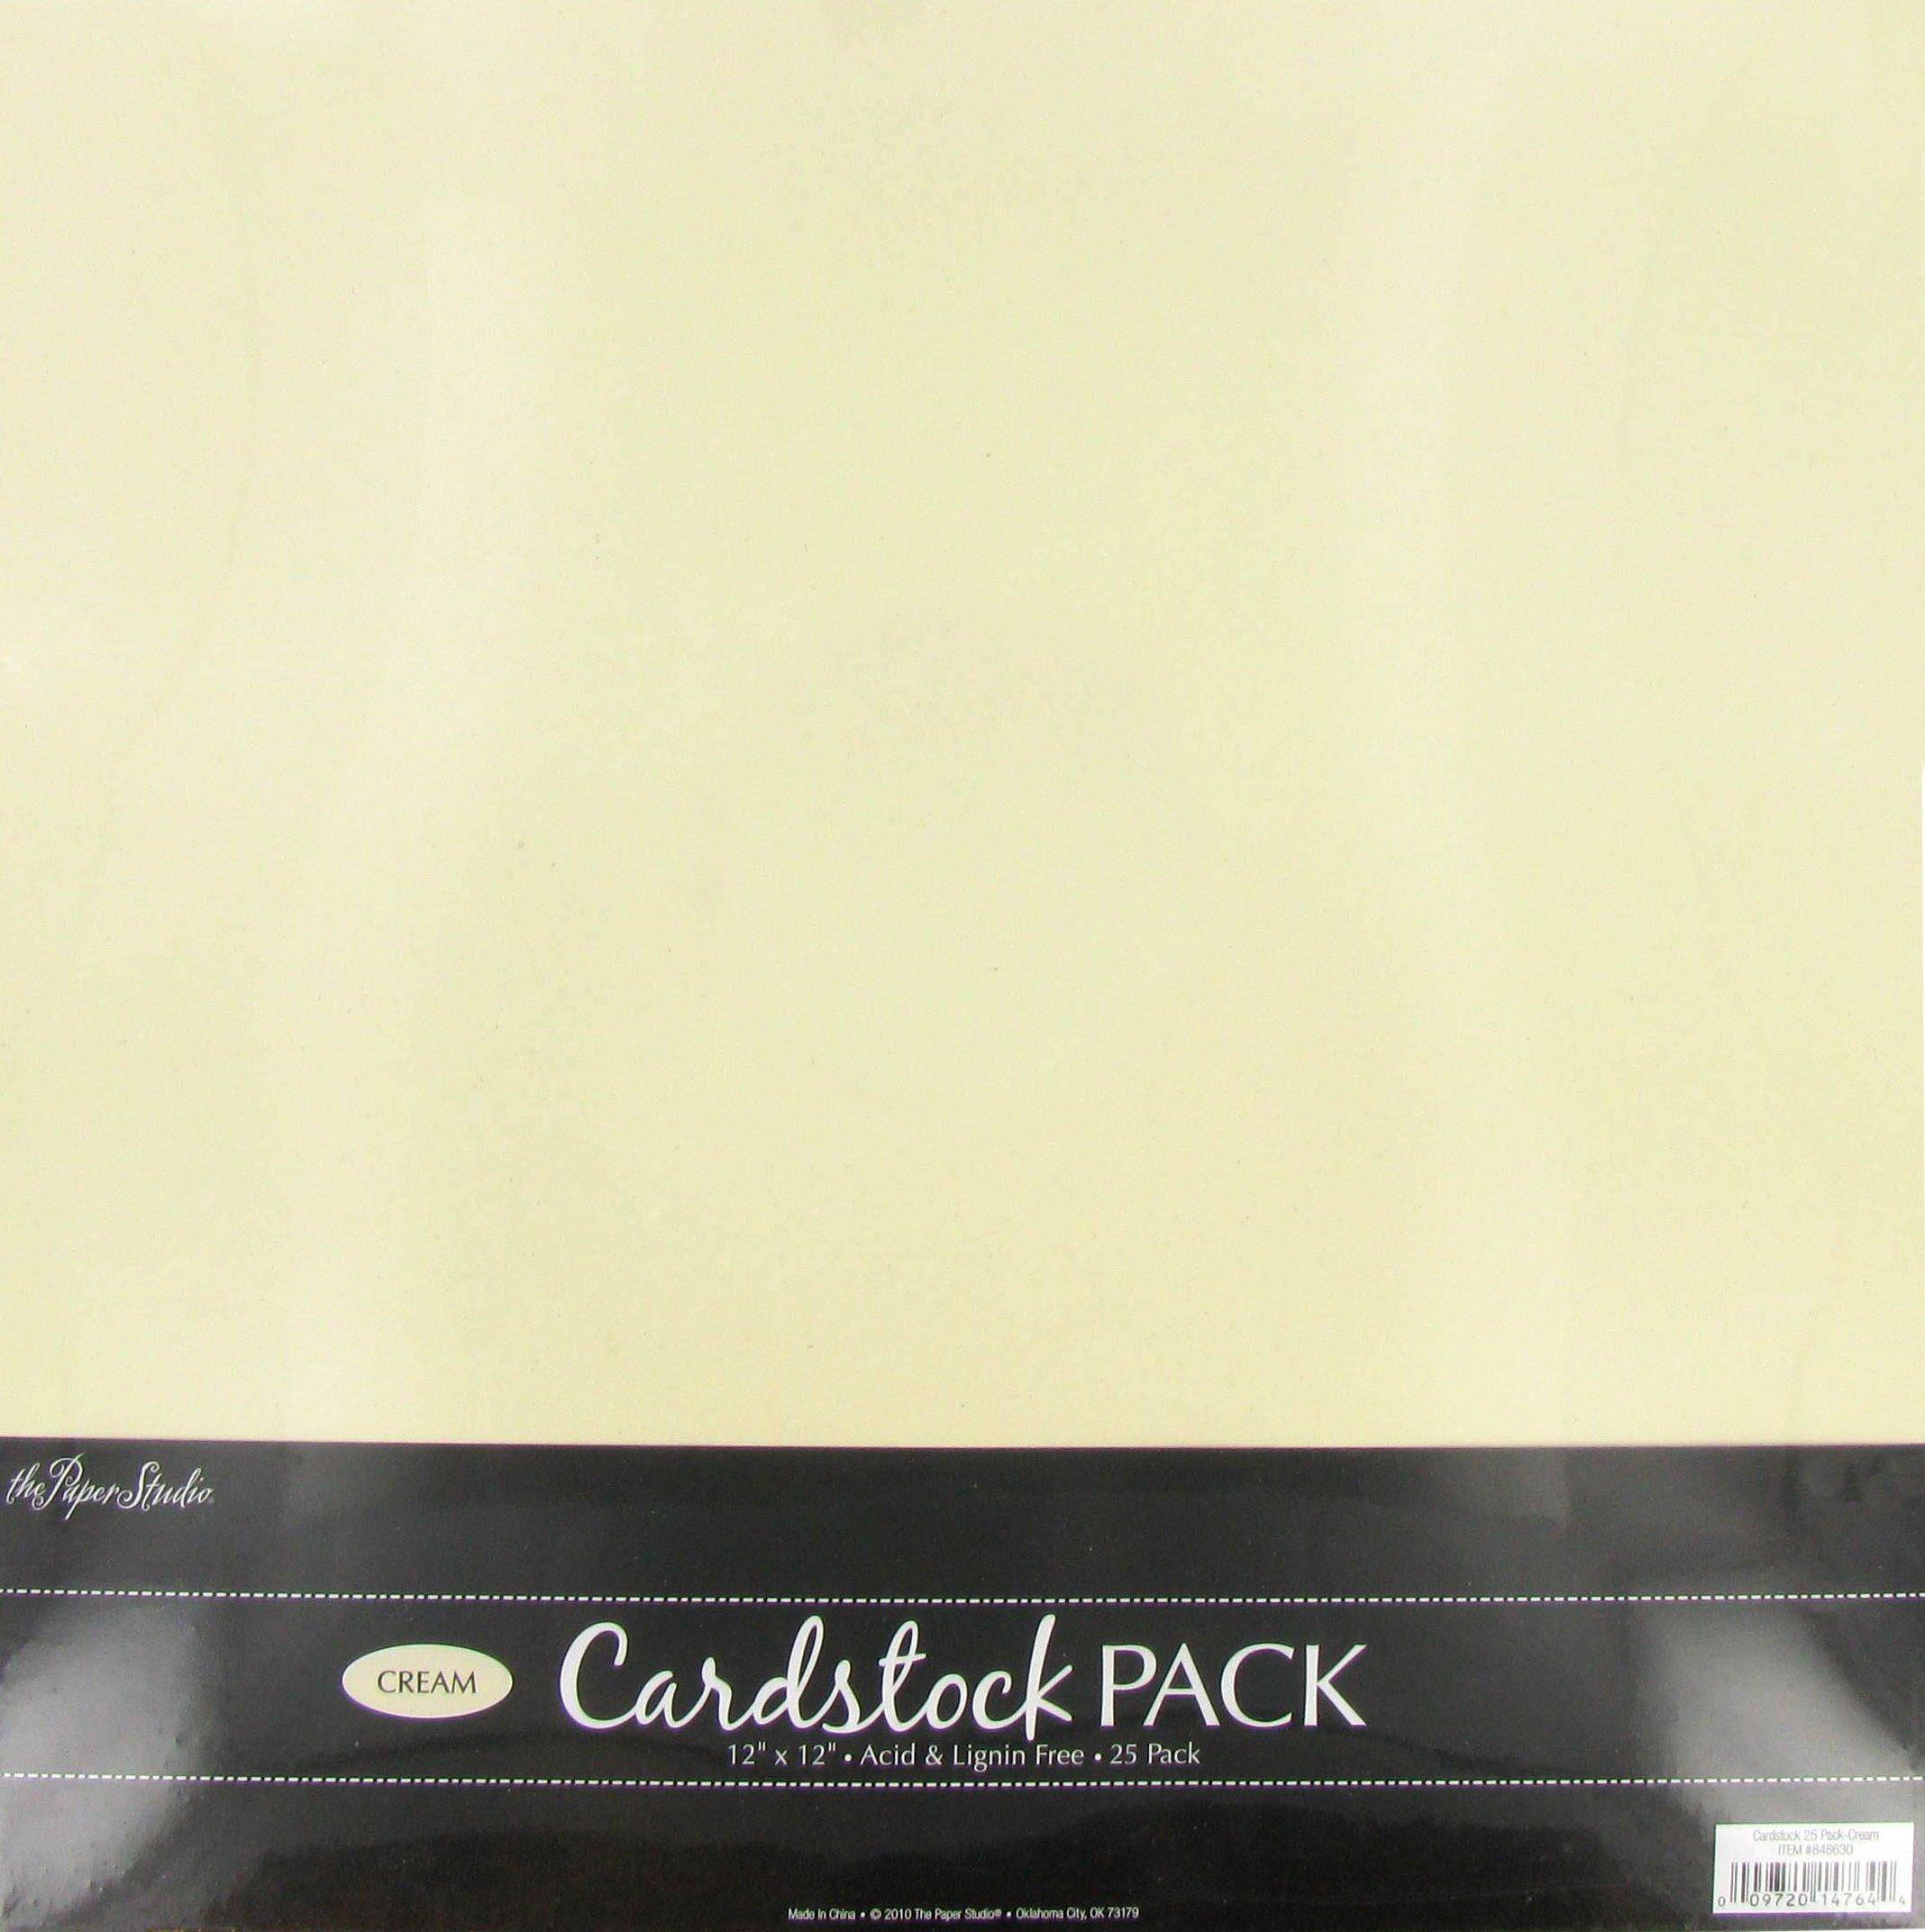 Kraft 5.5 x 7.5 Cardstock Paper by Recollections™, 100 Sheets